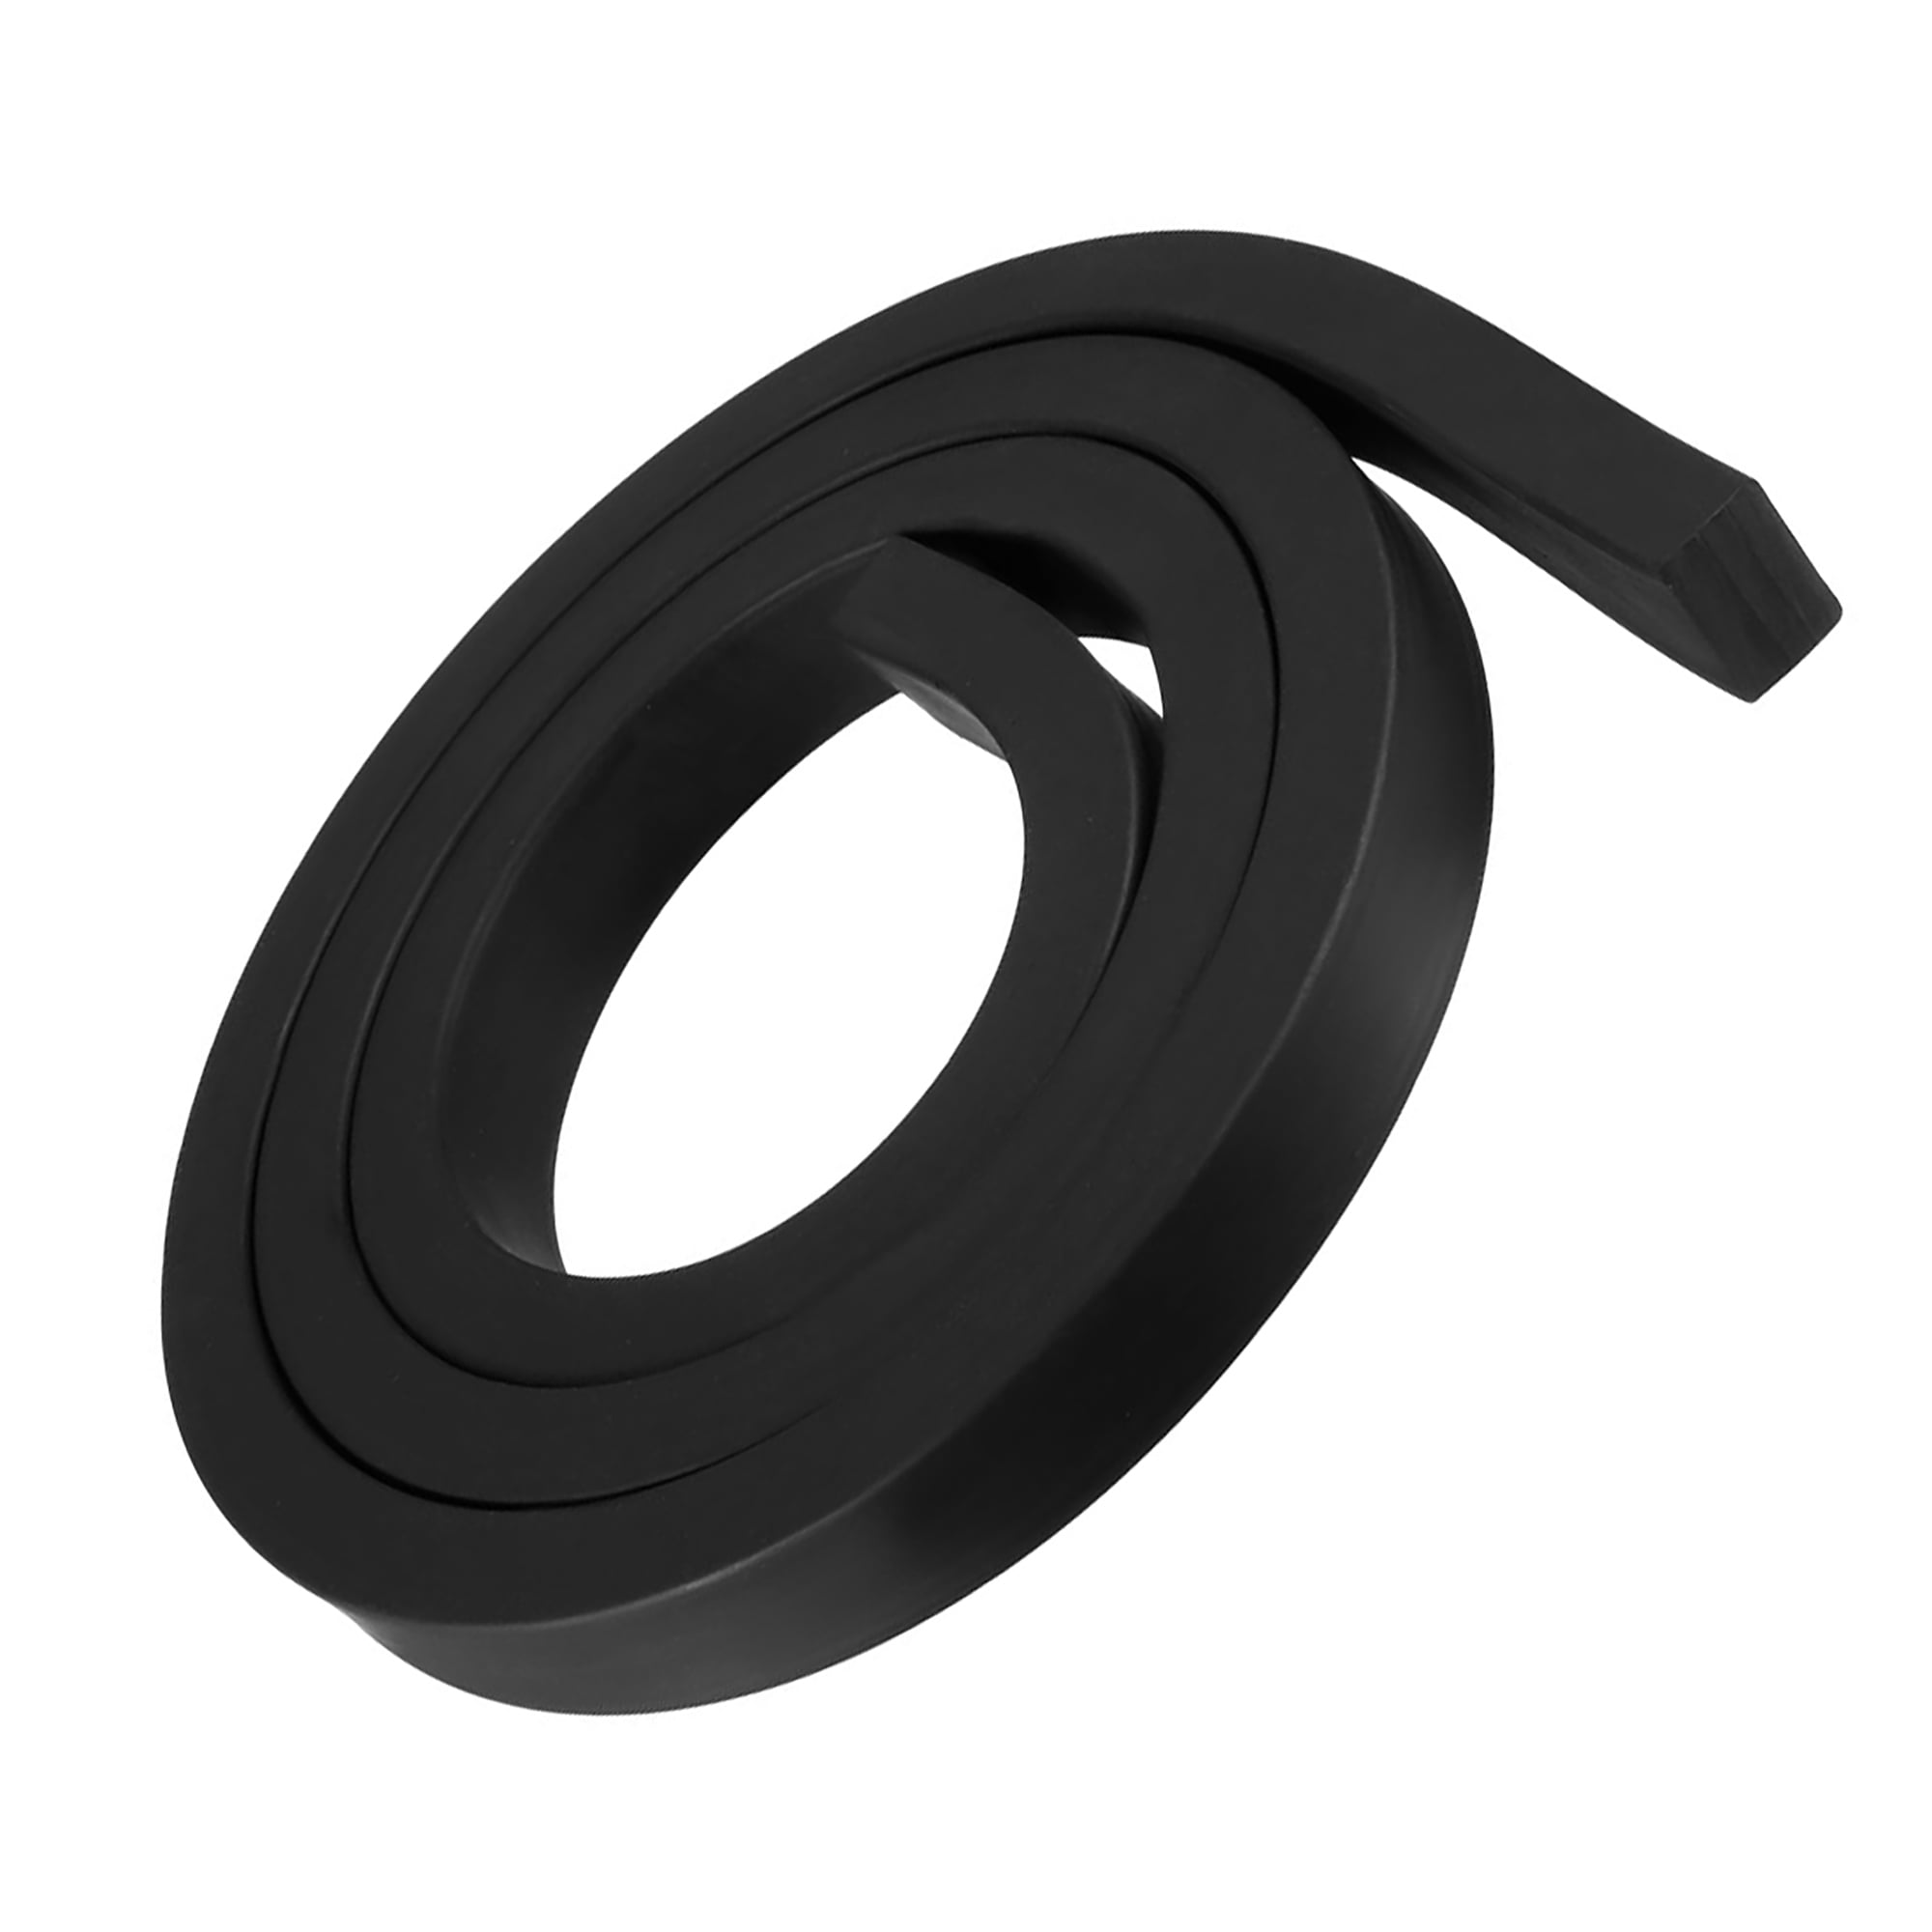 1 Meter Long Black Solid Rectangle Rubber Seal Strip 15mm Wide 10mm Thick 